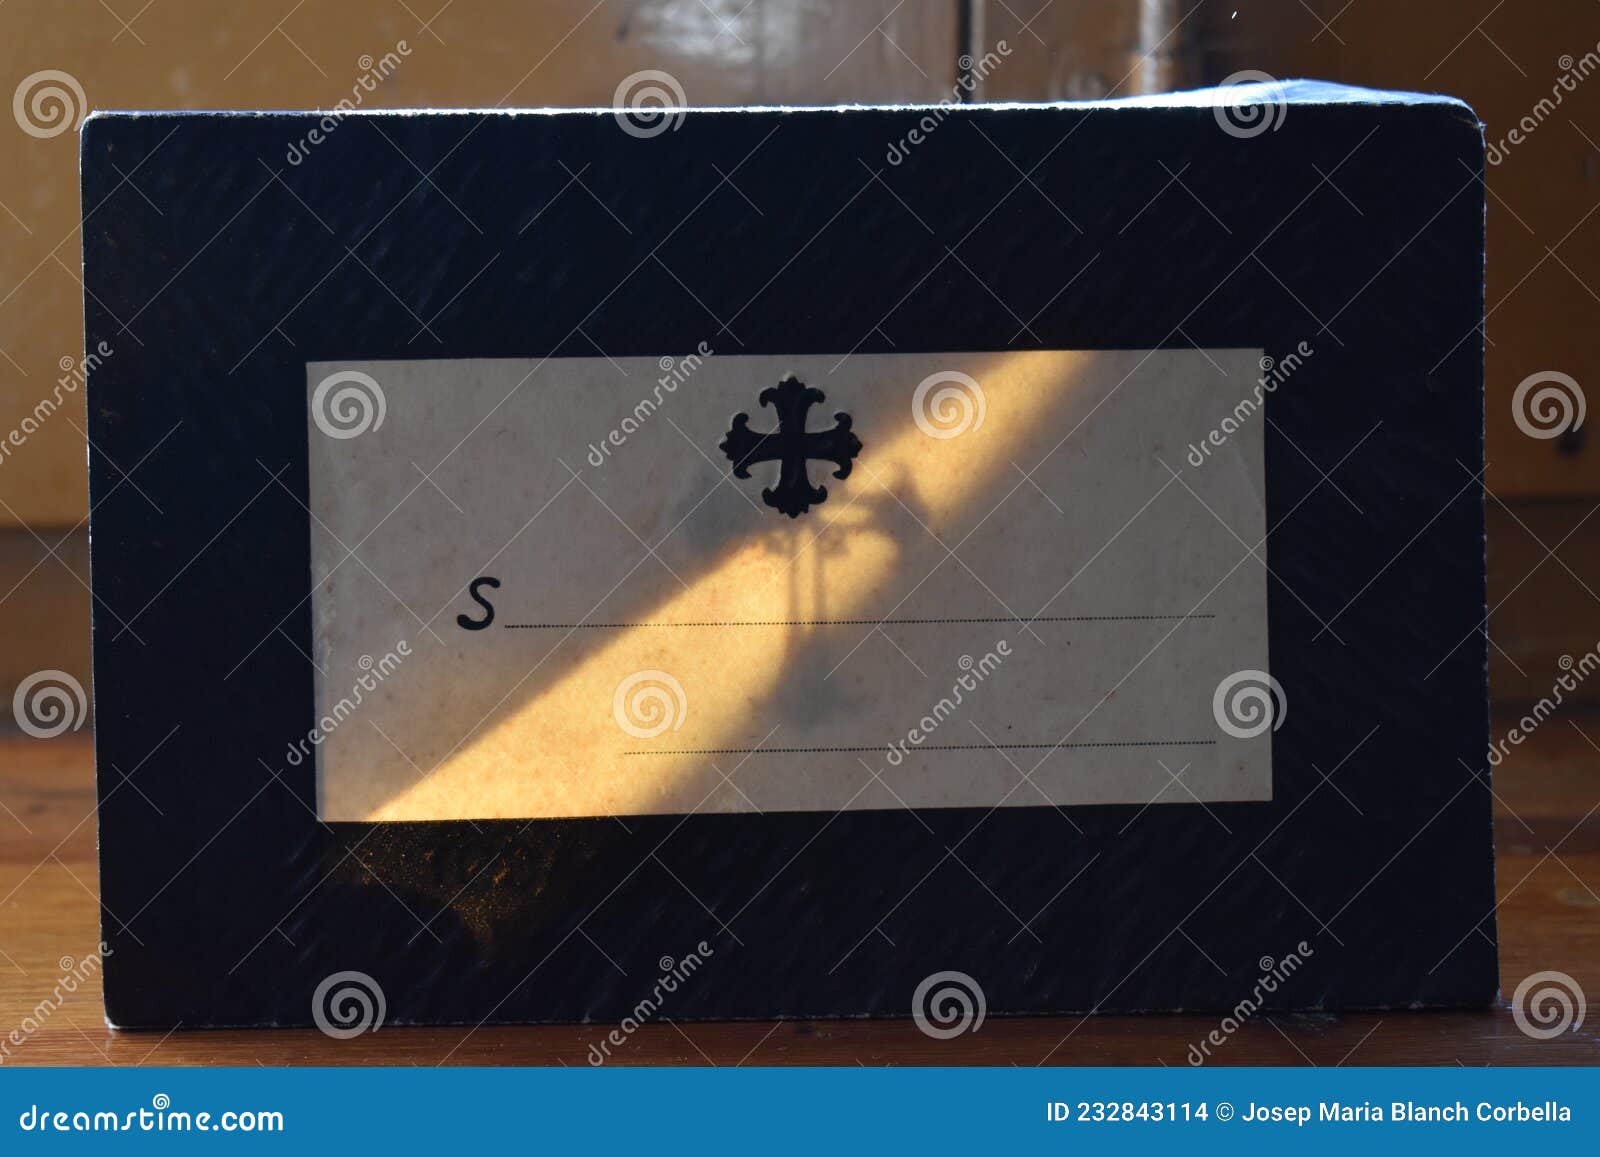 a stamped obituary letter envelope without sending